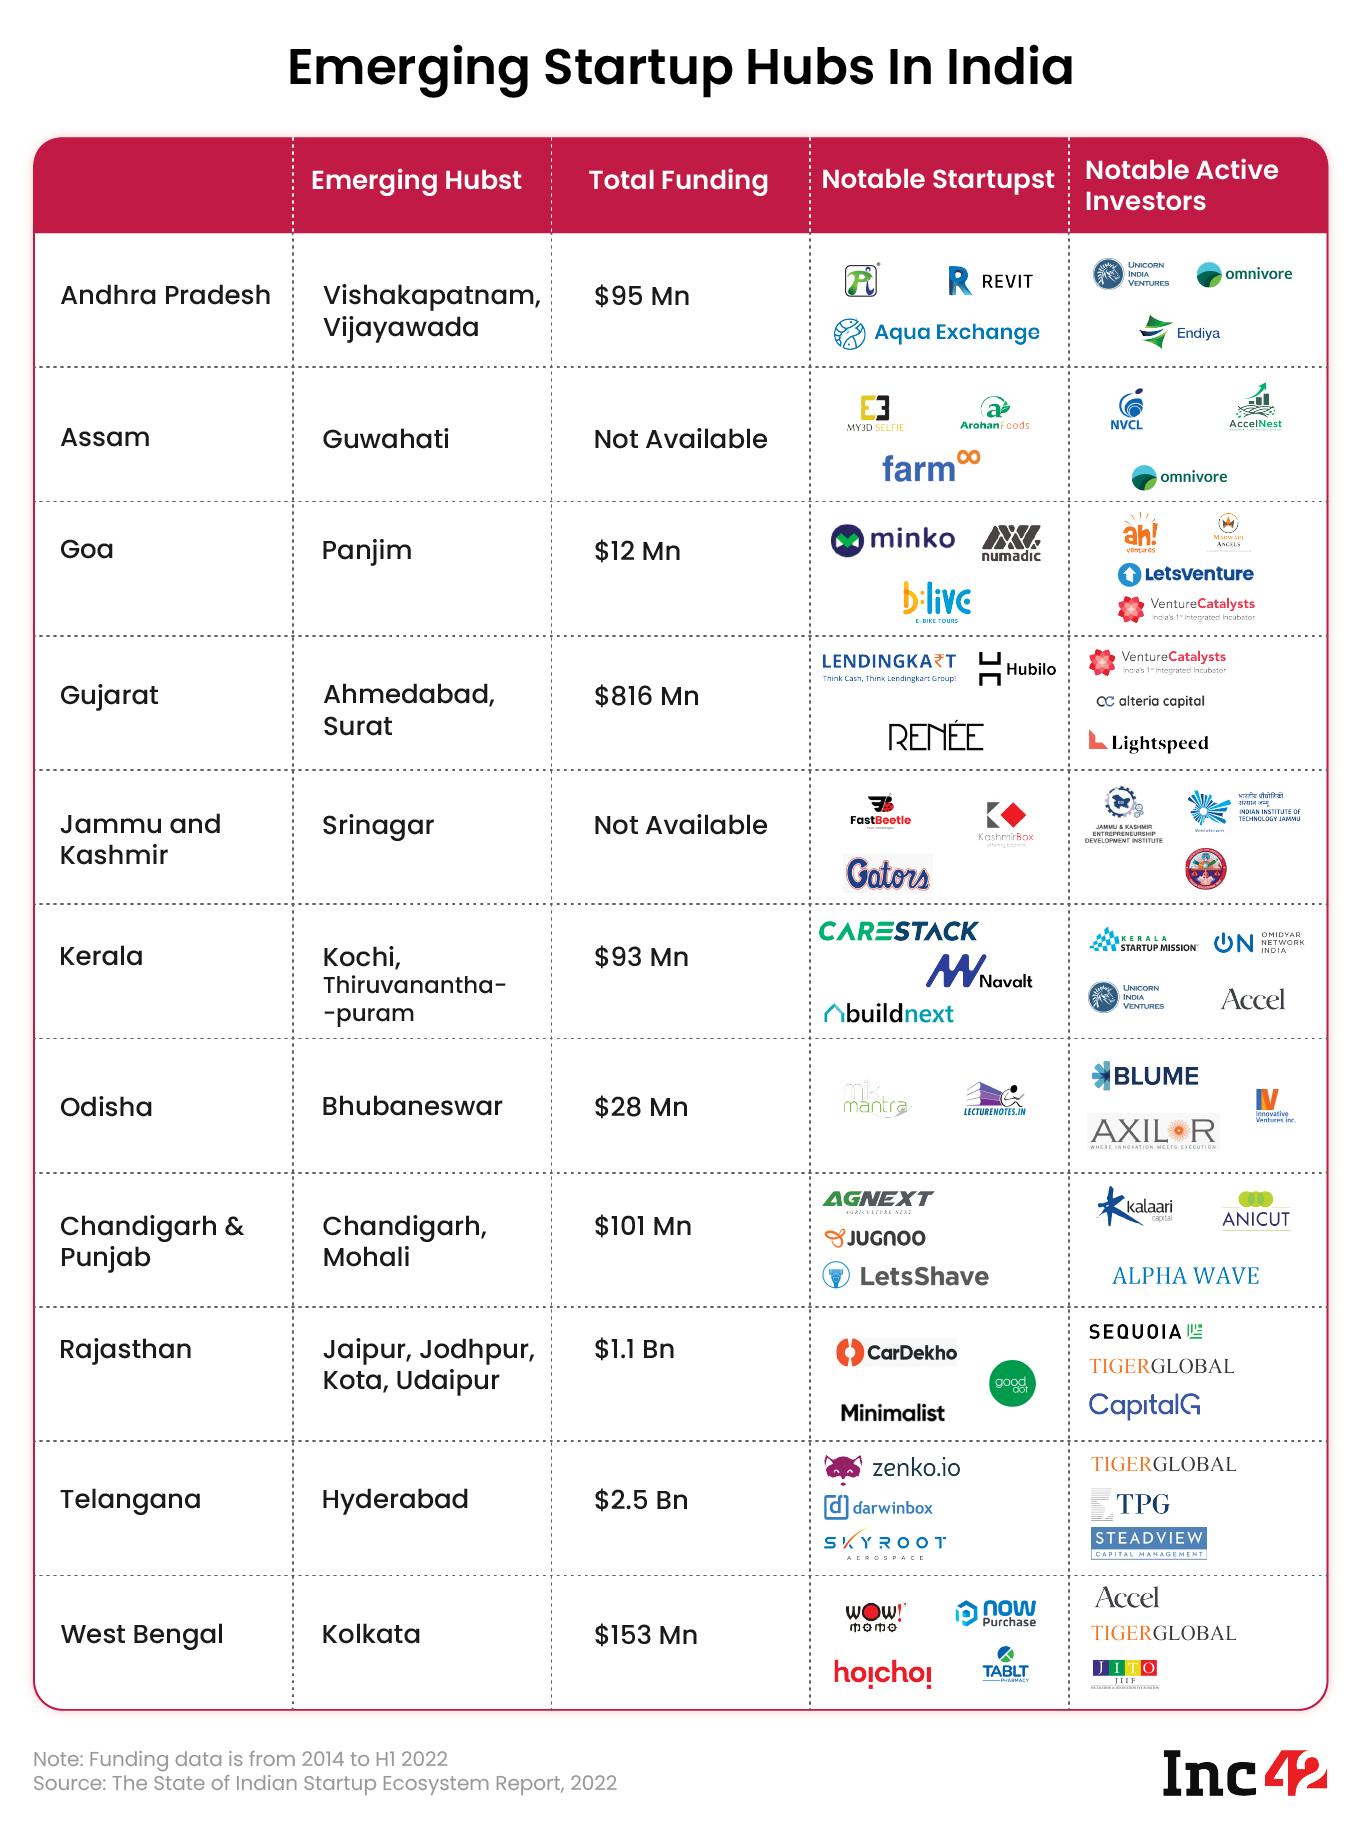 Table of emerging startup hubs in India